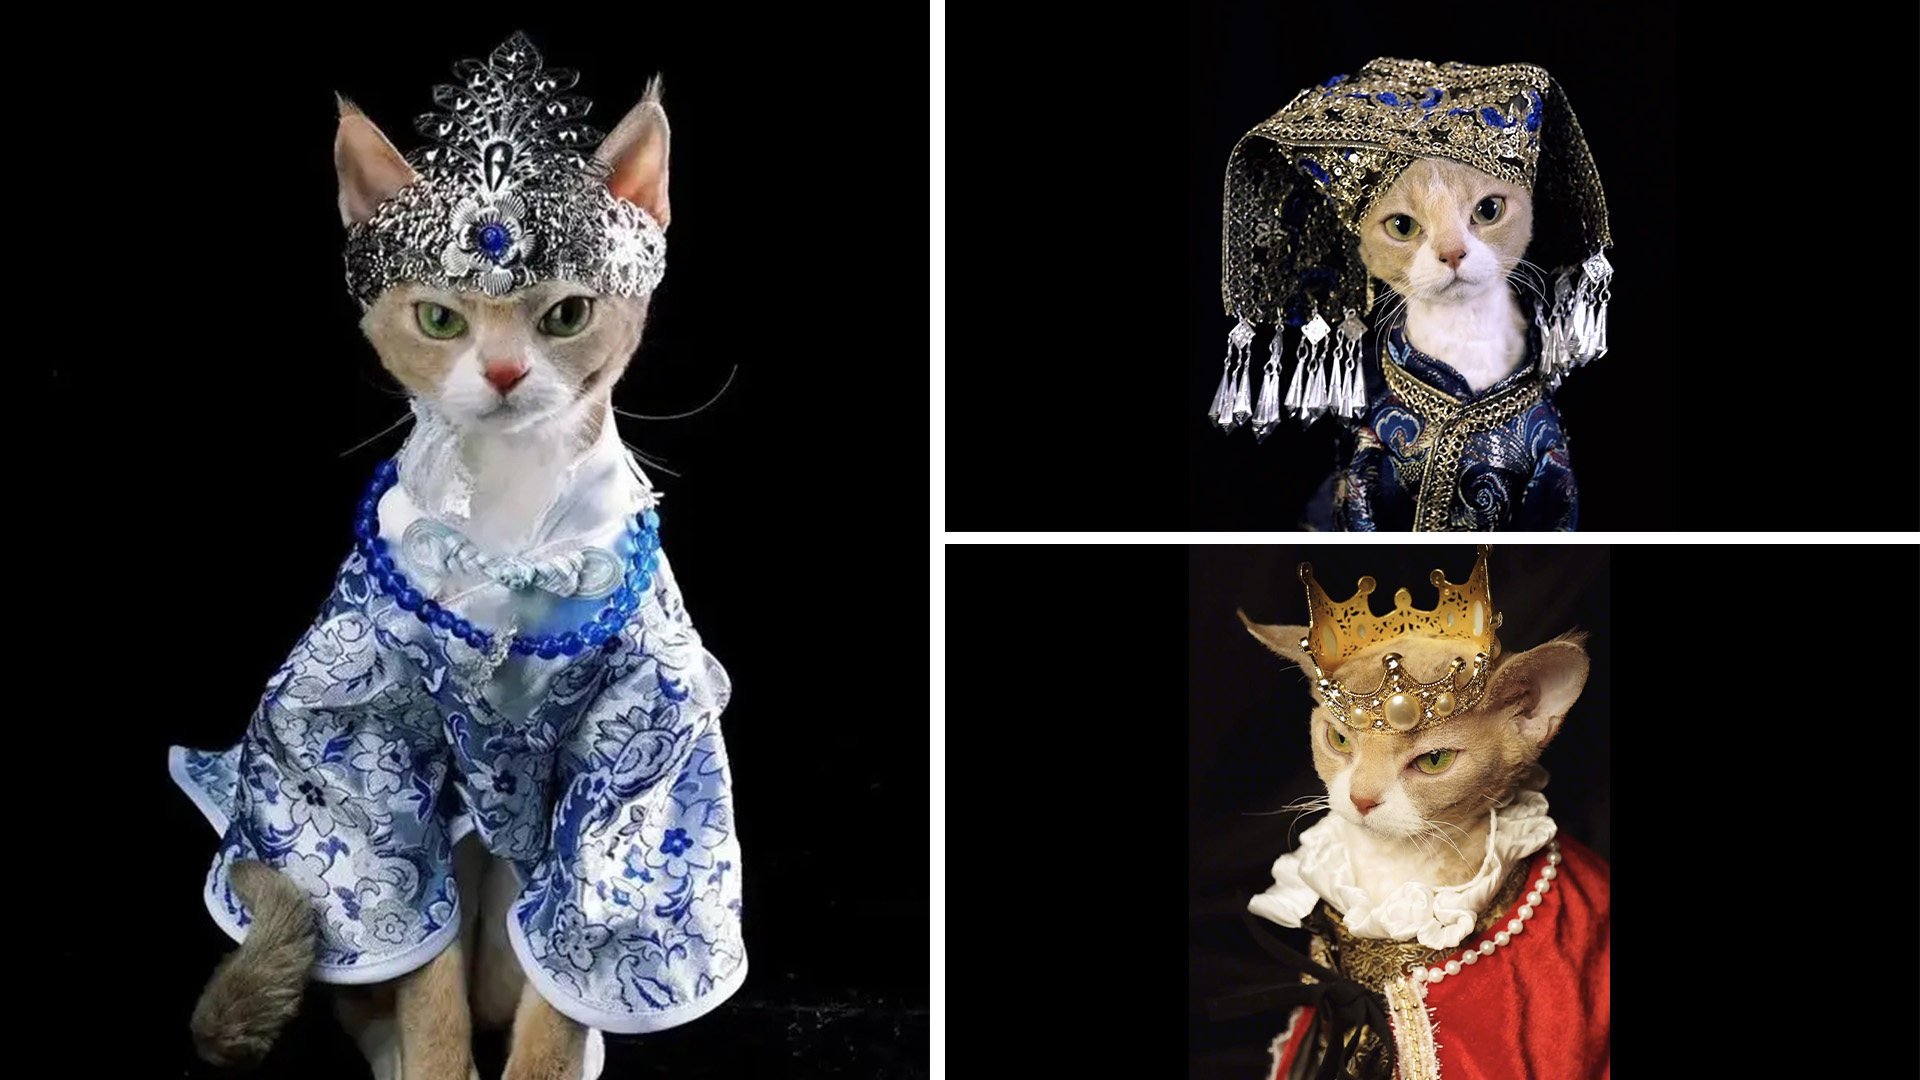 The popular blue-and-white dress along with the other costumes were all made by the cat’s owner, a designer in eastern China. Photo: SCMP composite/Handout